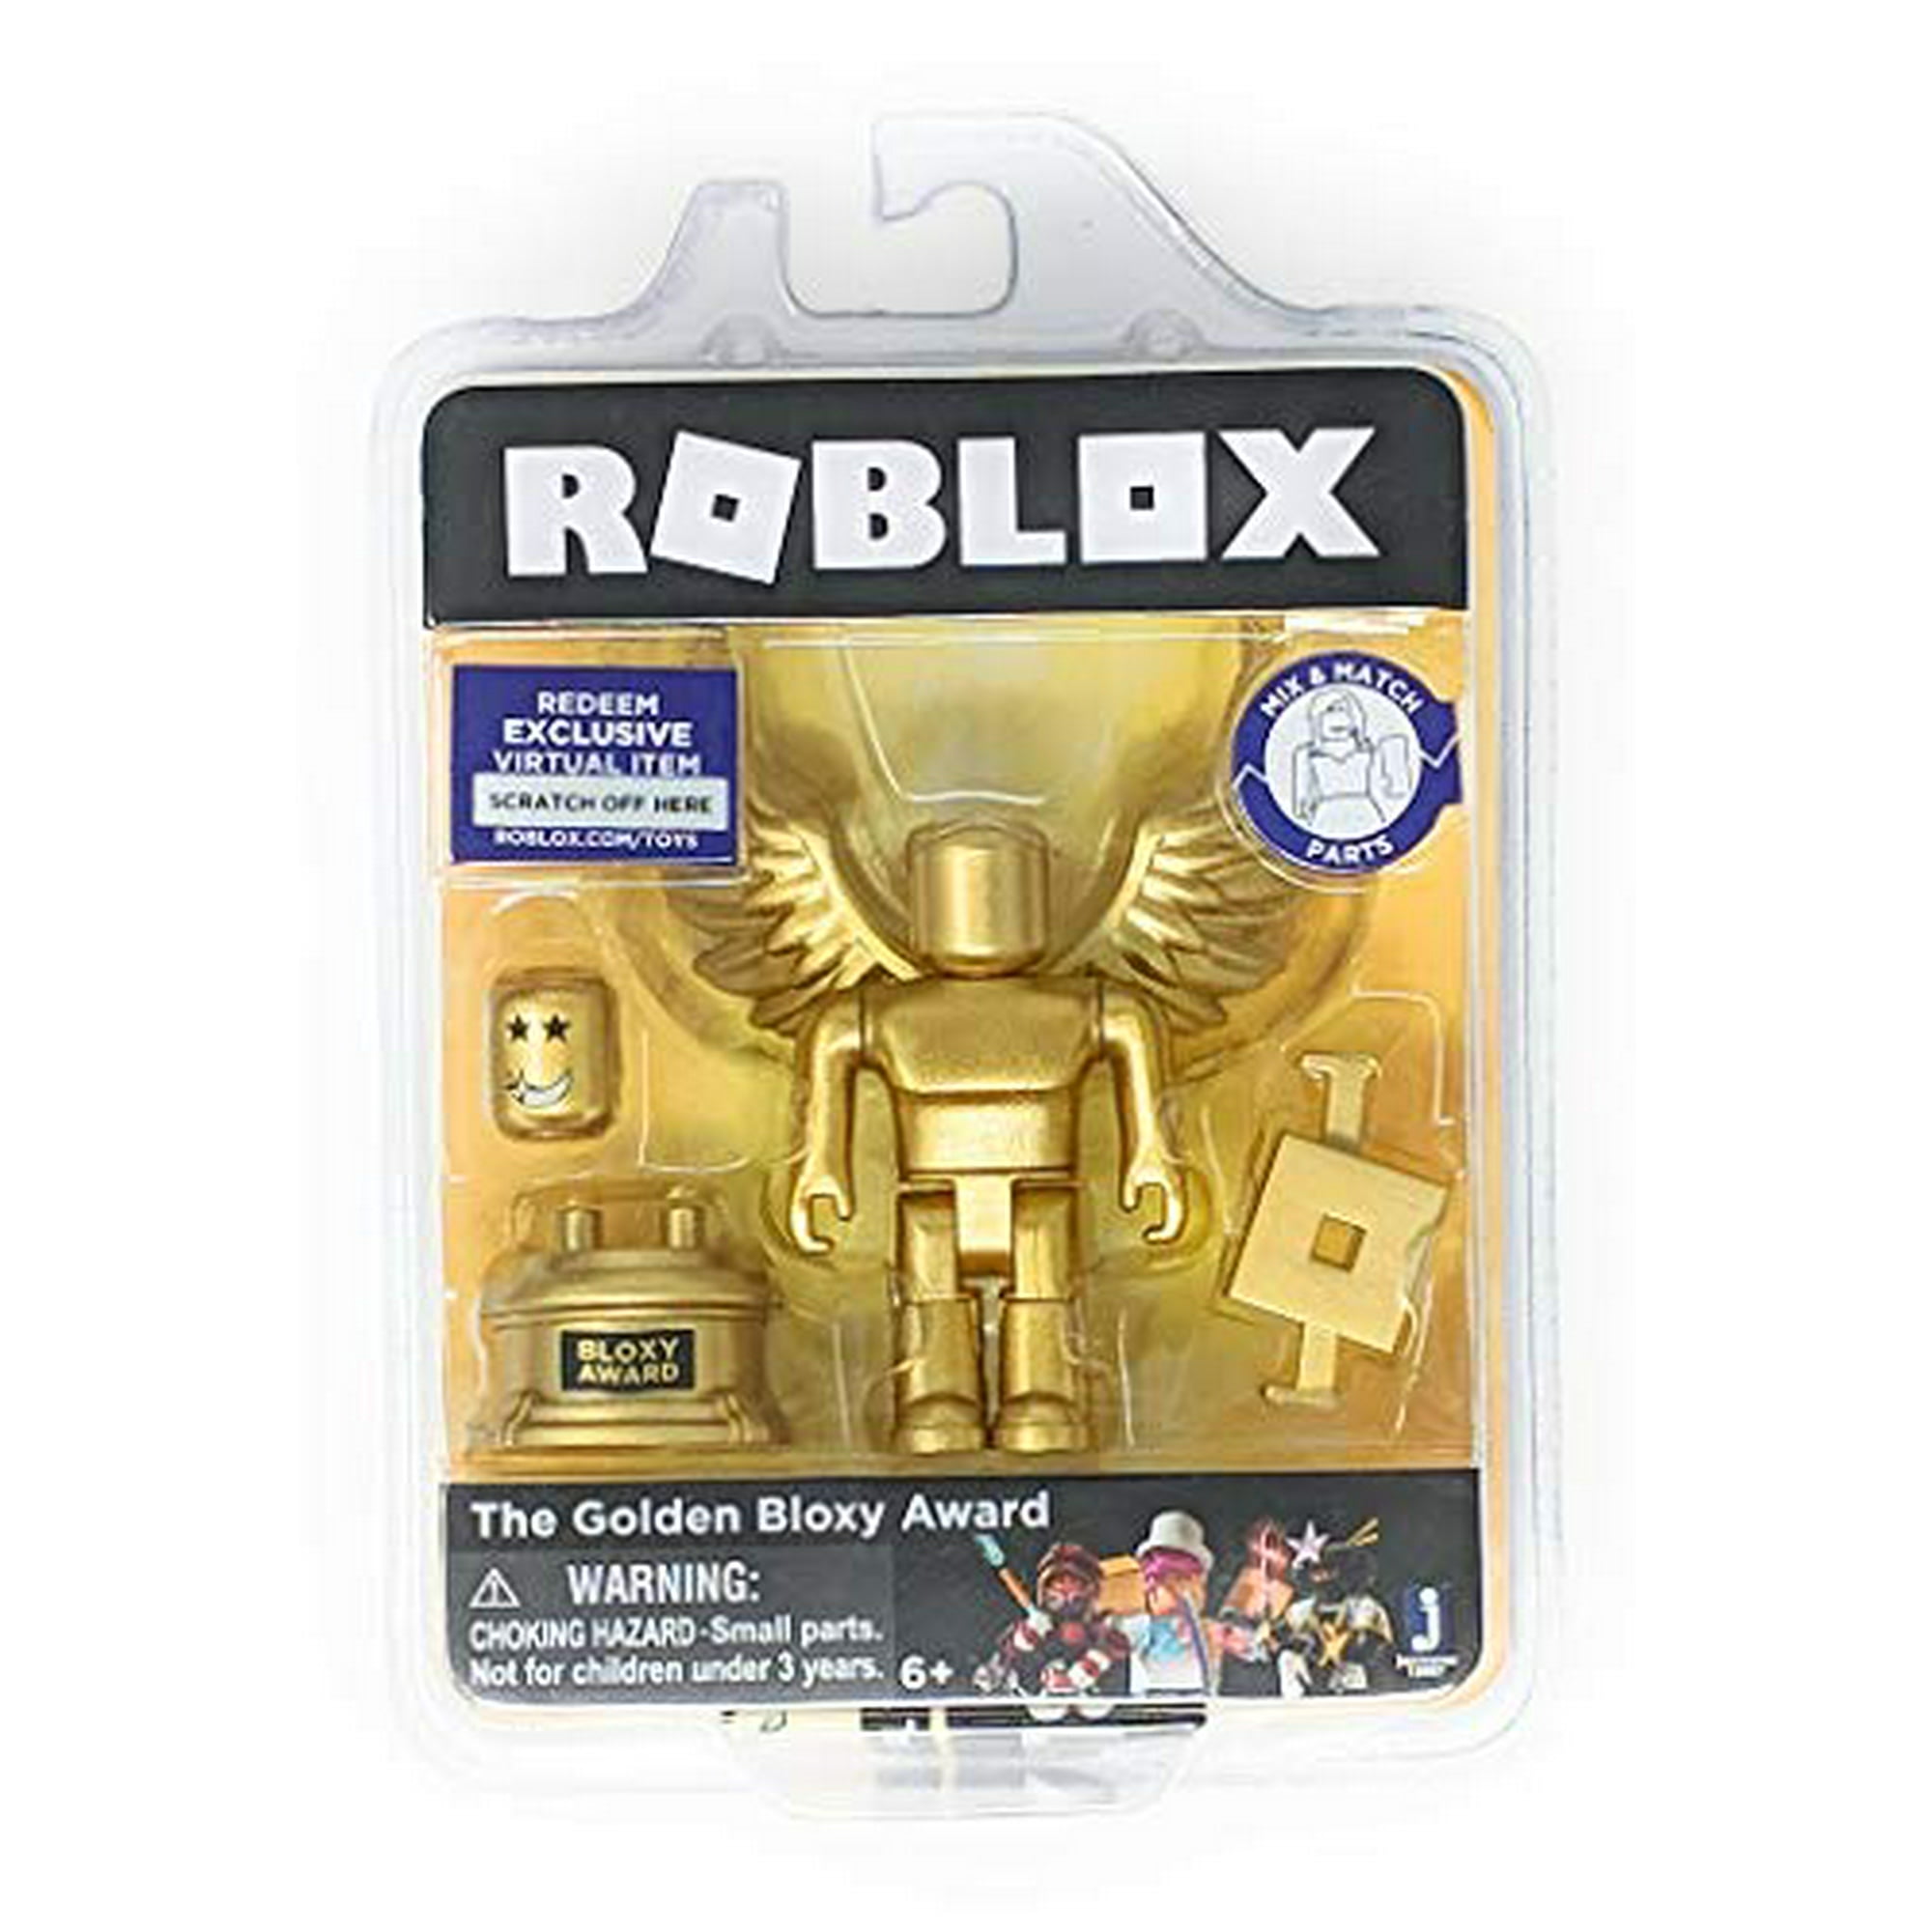 Roblox Gold Collection The Golden Bloxy Award Single Figure Pack With Exclusive Virtual Item Code Walmart Canada - roblox celebrity collection the golden bloxy award figure pack includes exclusive virtual item walmart com walmart com